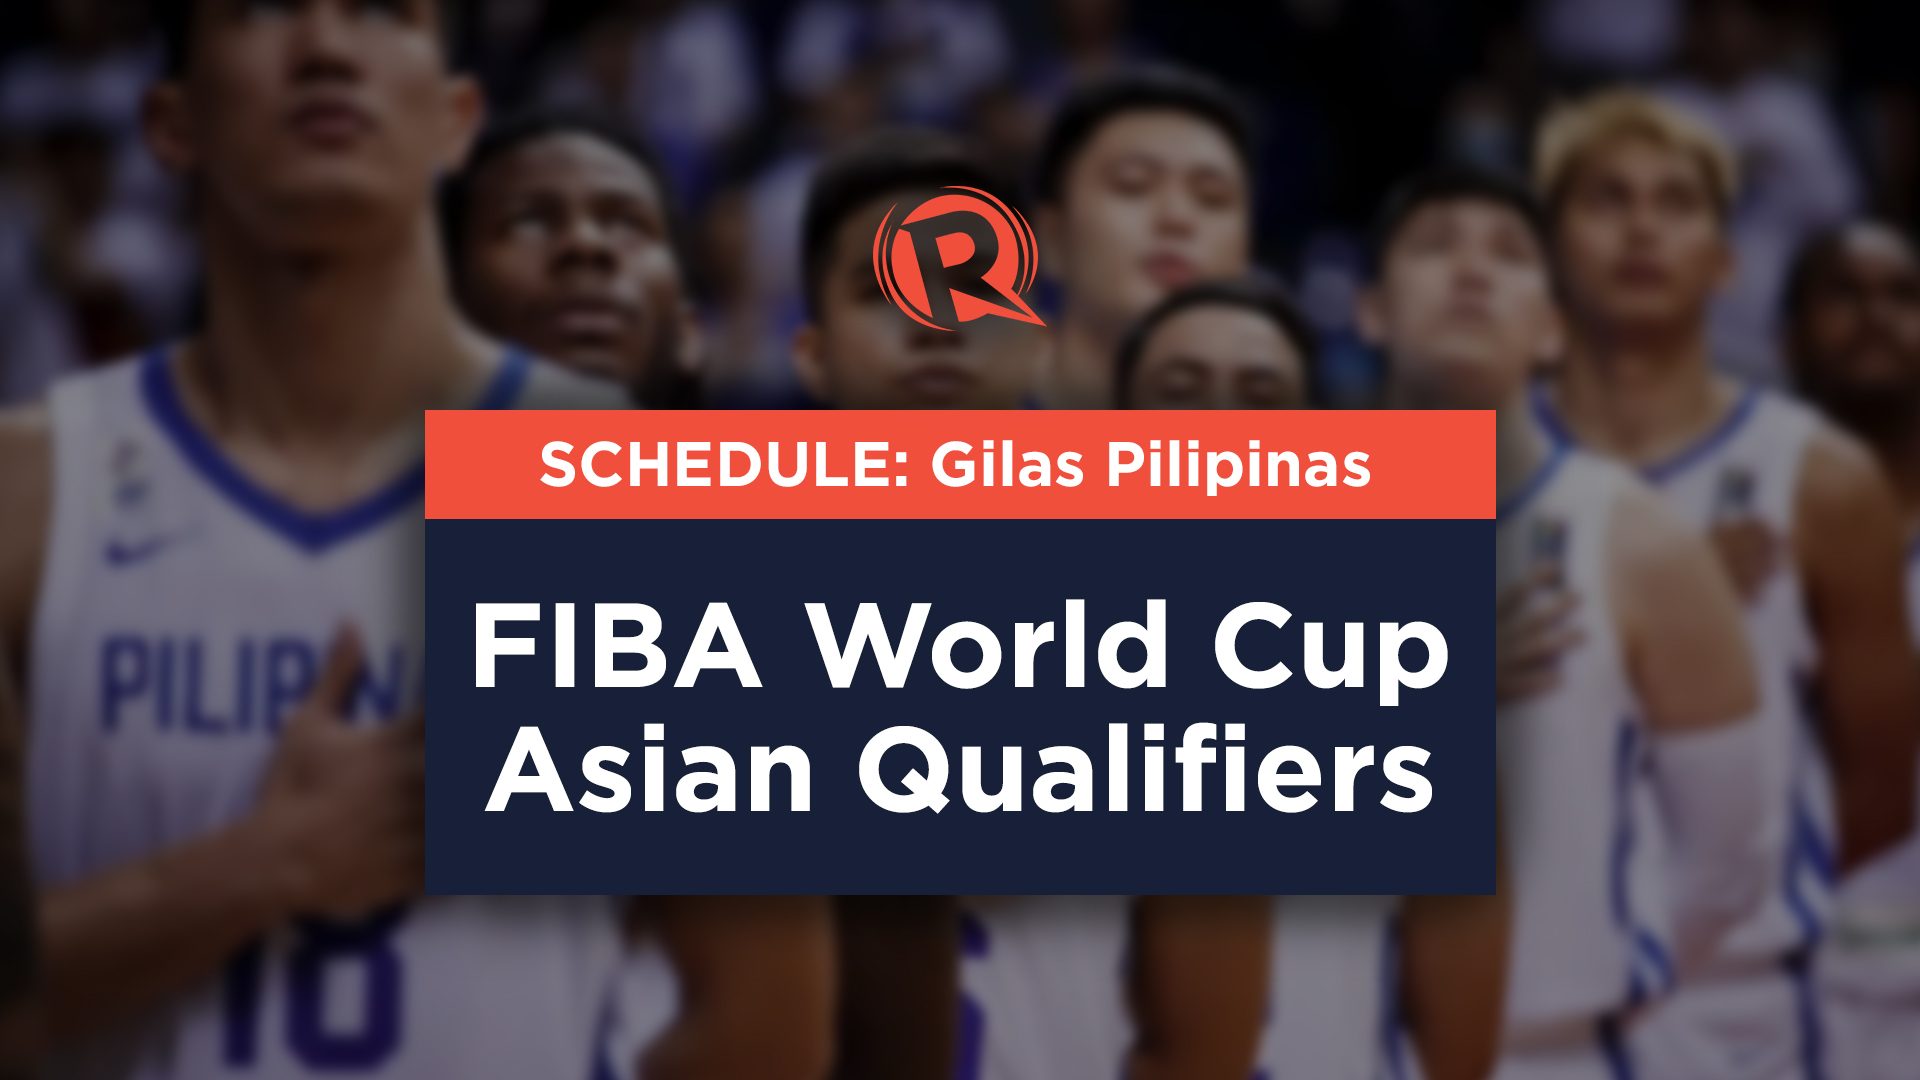 SCHEDULE: Gilas Pilipinas games at FIBA World Cup Asian Qualifiers 2022